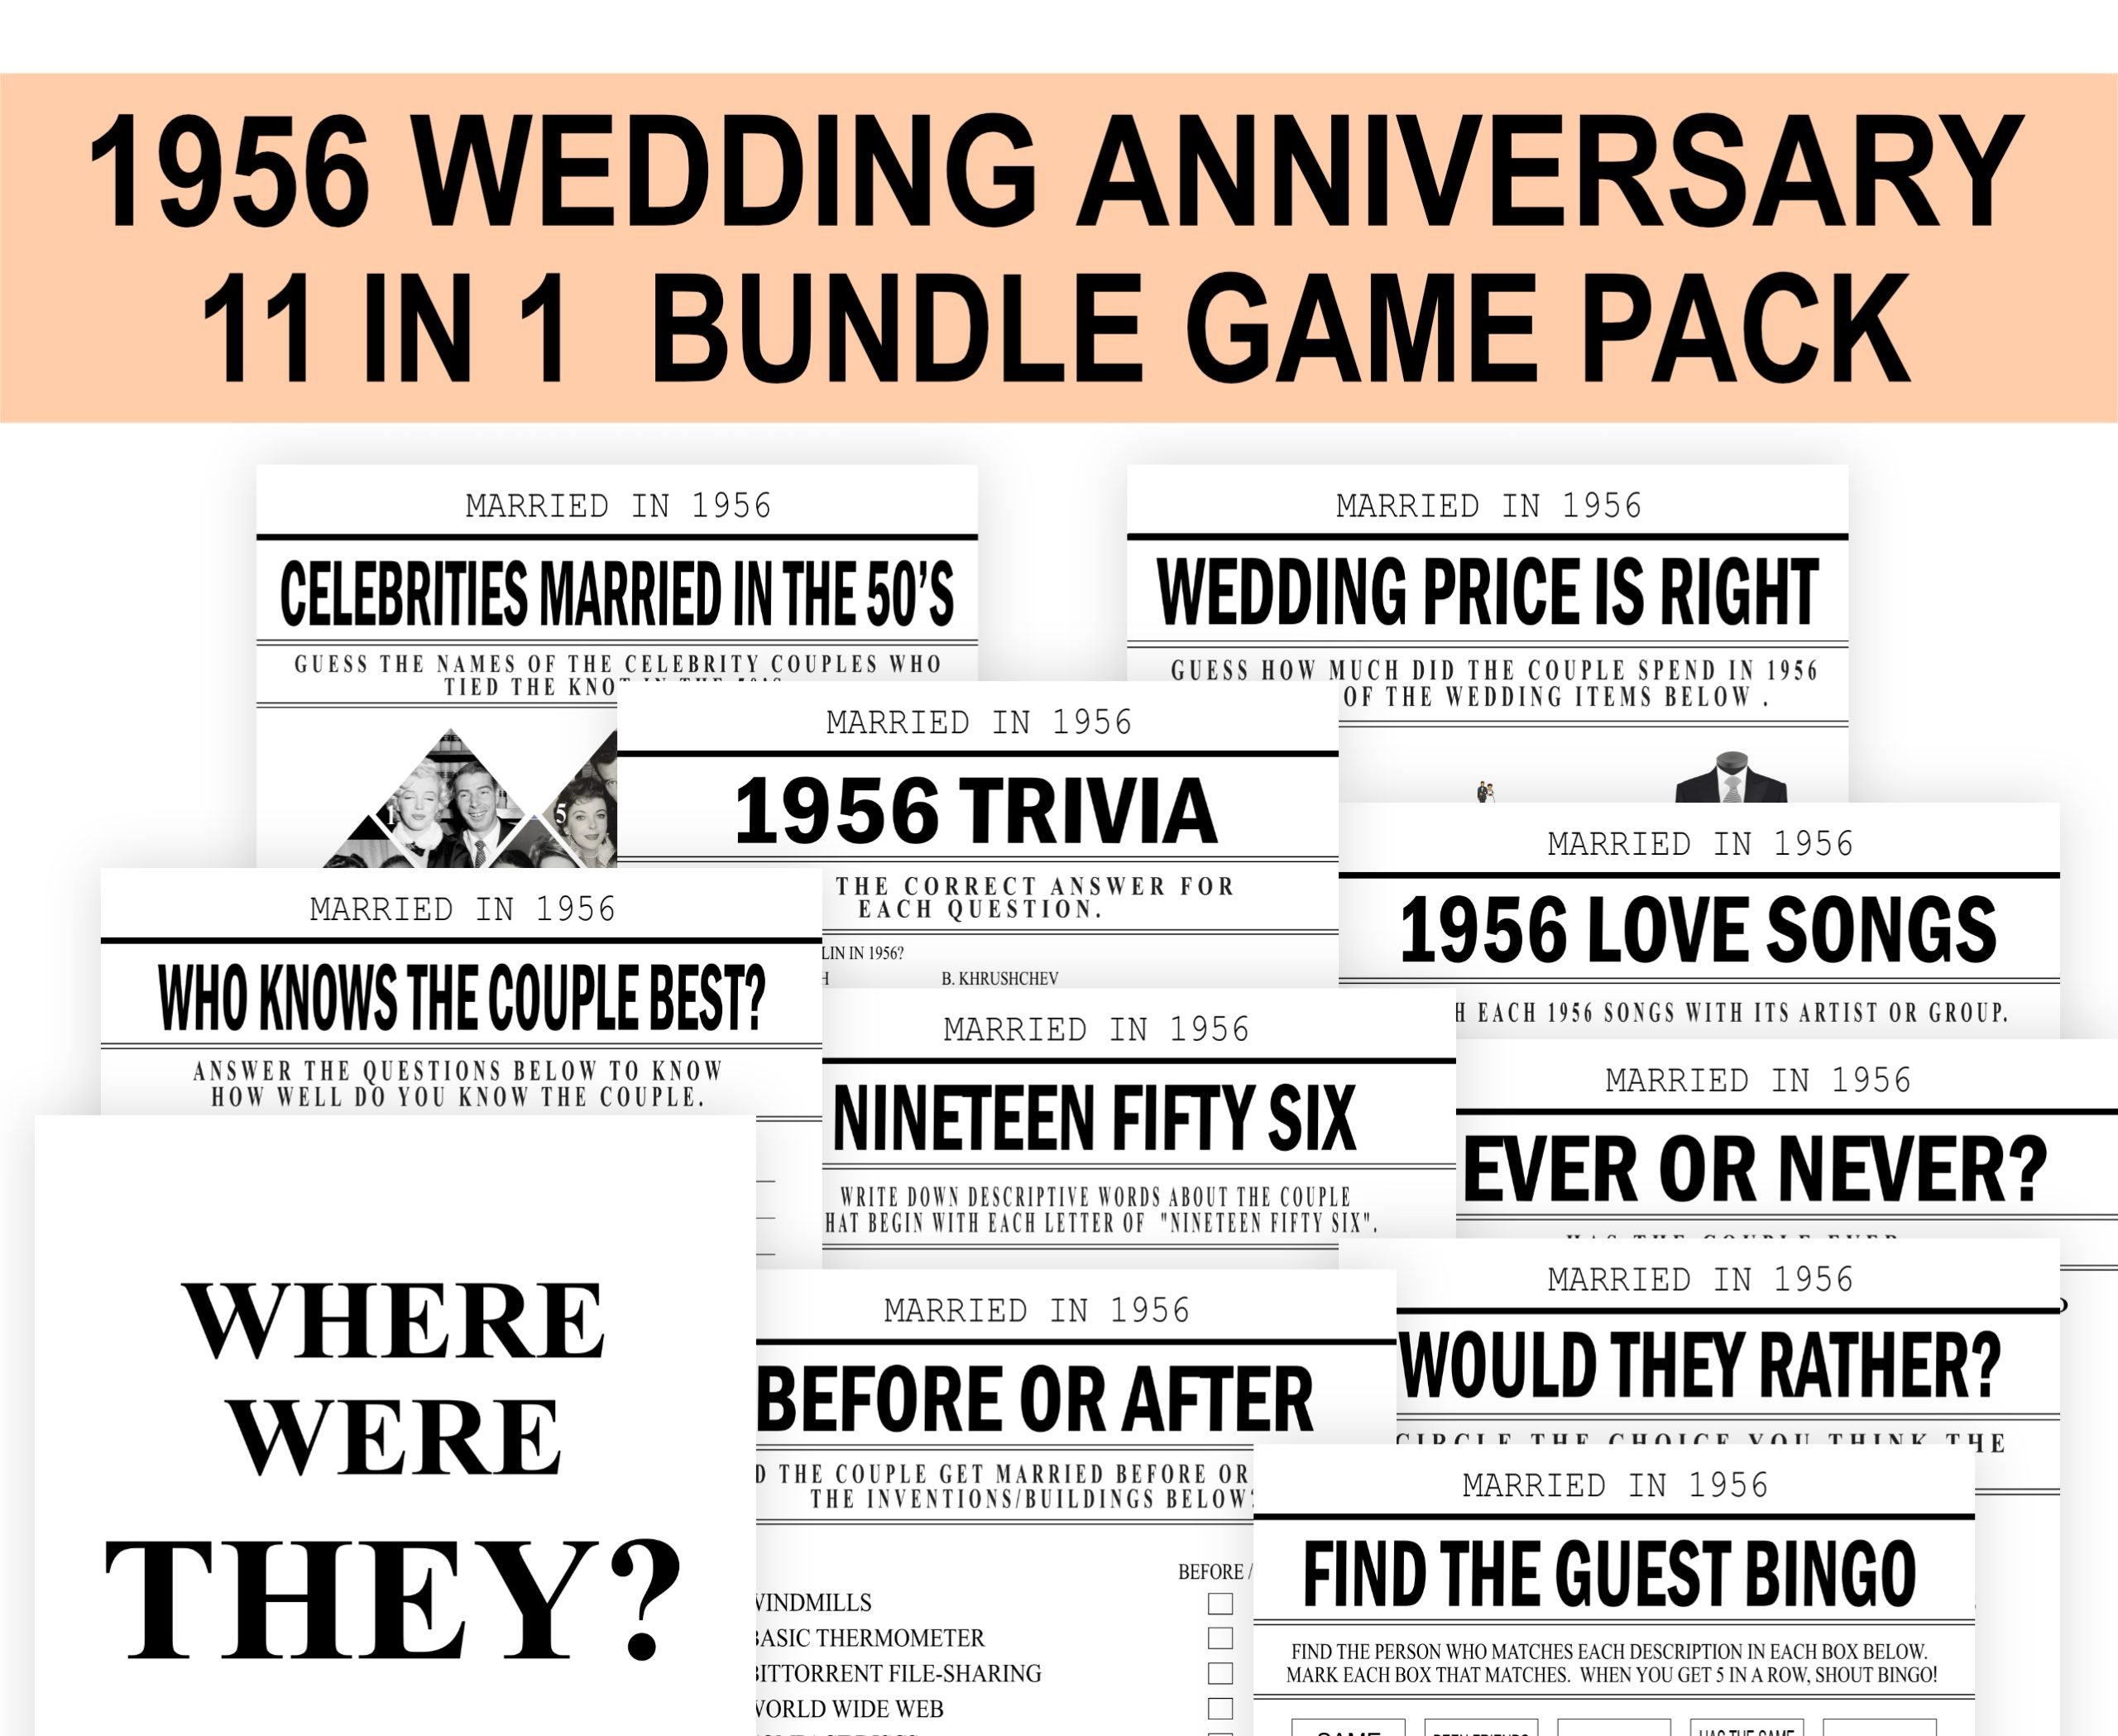 ANNIVERSARY 67th Wedding Anniversary Games Married in 1956 Game Bundle Pack – PRINTABLE 1956 Anniversary Games